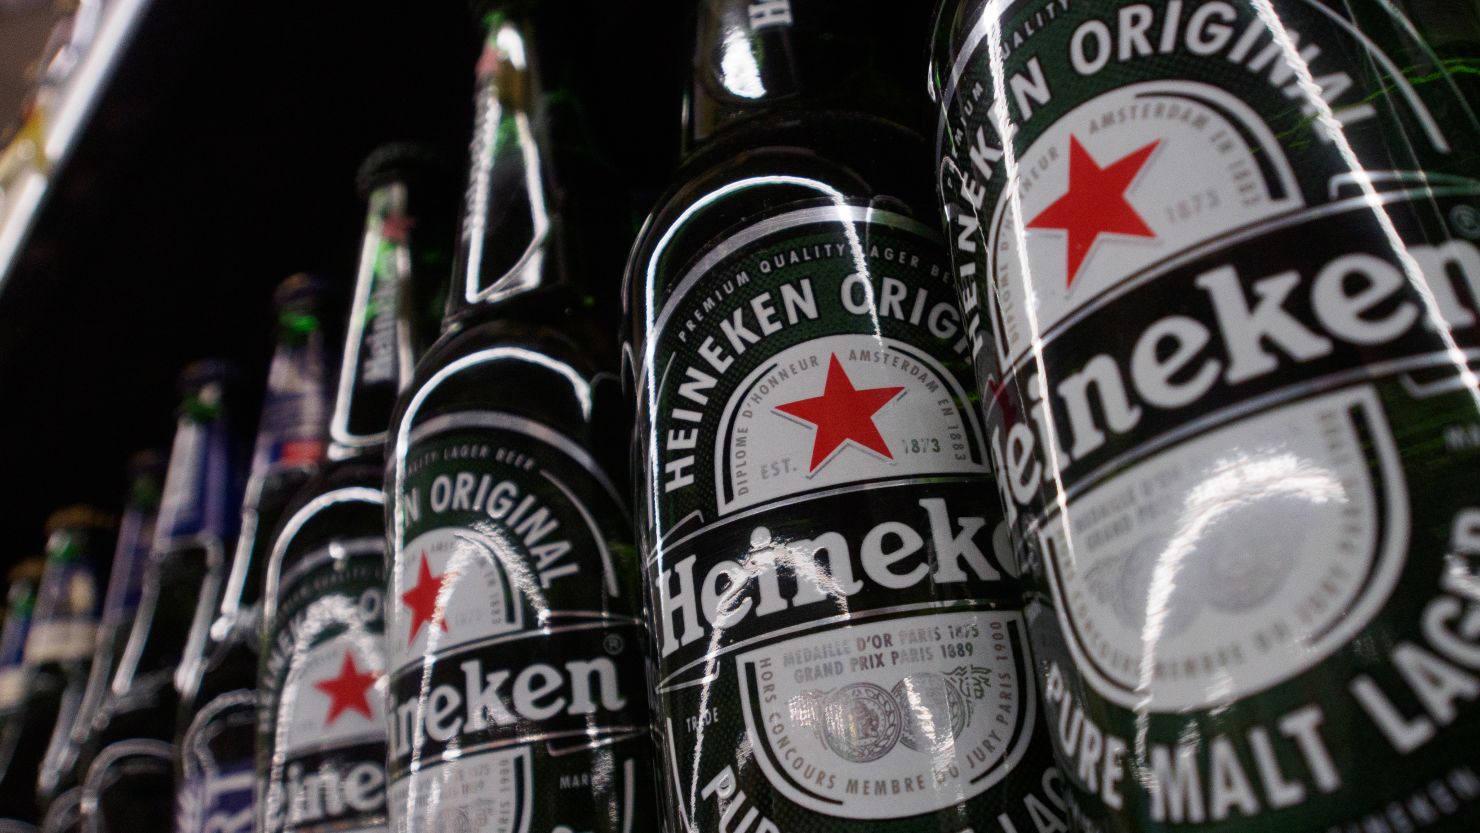 Heineken completes exit from Russia – POLITICO